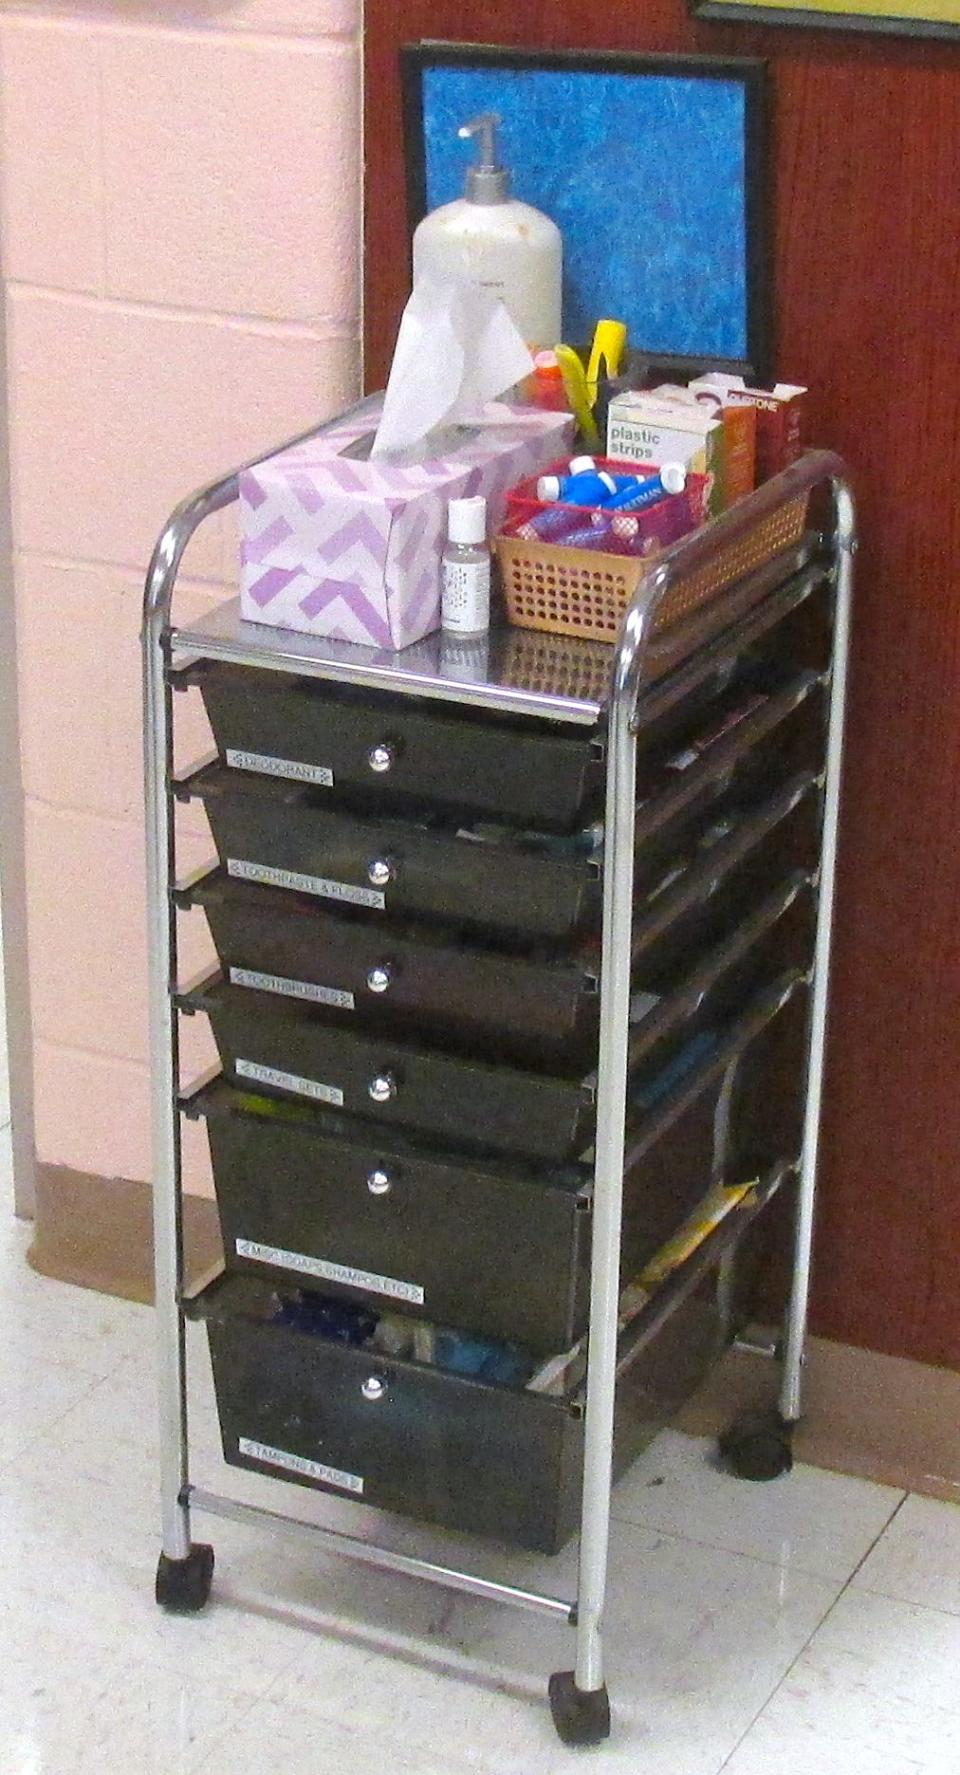 An art cart of personal hygiene products is available to students who need them in Sandy Miller's art room at the high school.